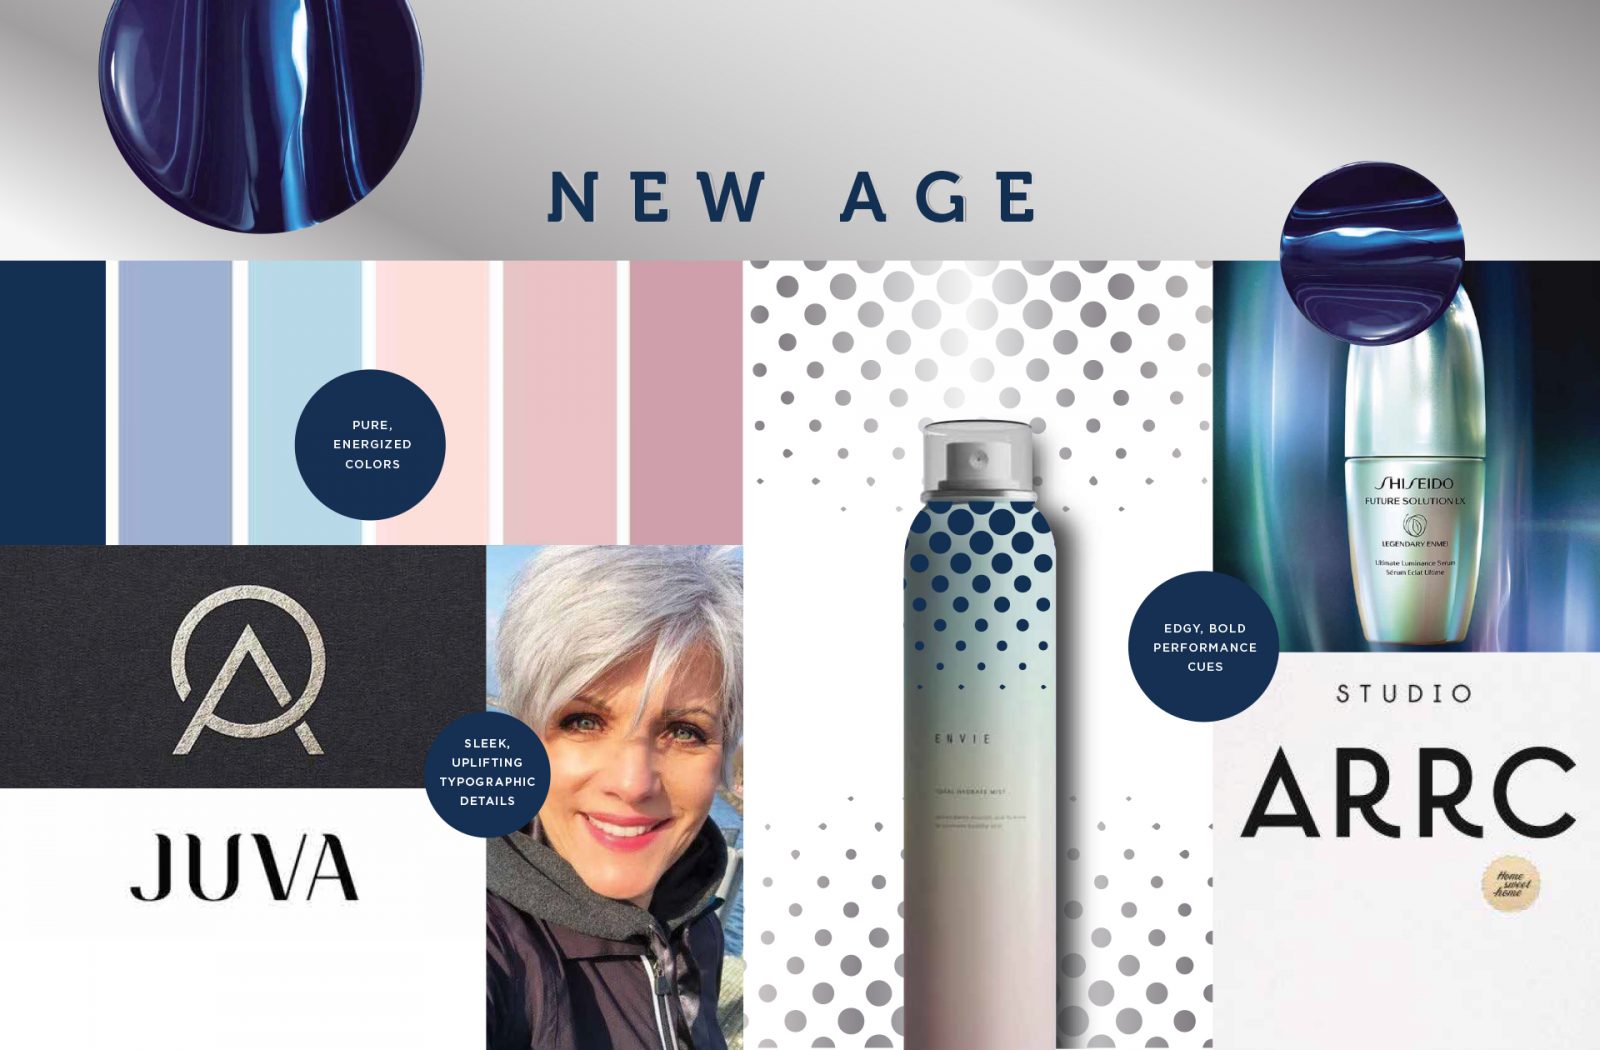 Collage of colors, fonts, styles and products that served as inspiration for a product packaging design agency creating a visual brand identity for Hair Biology.